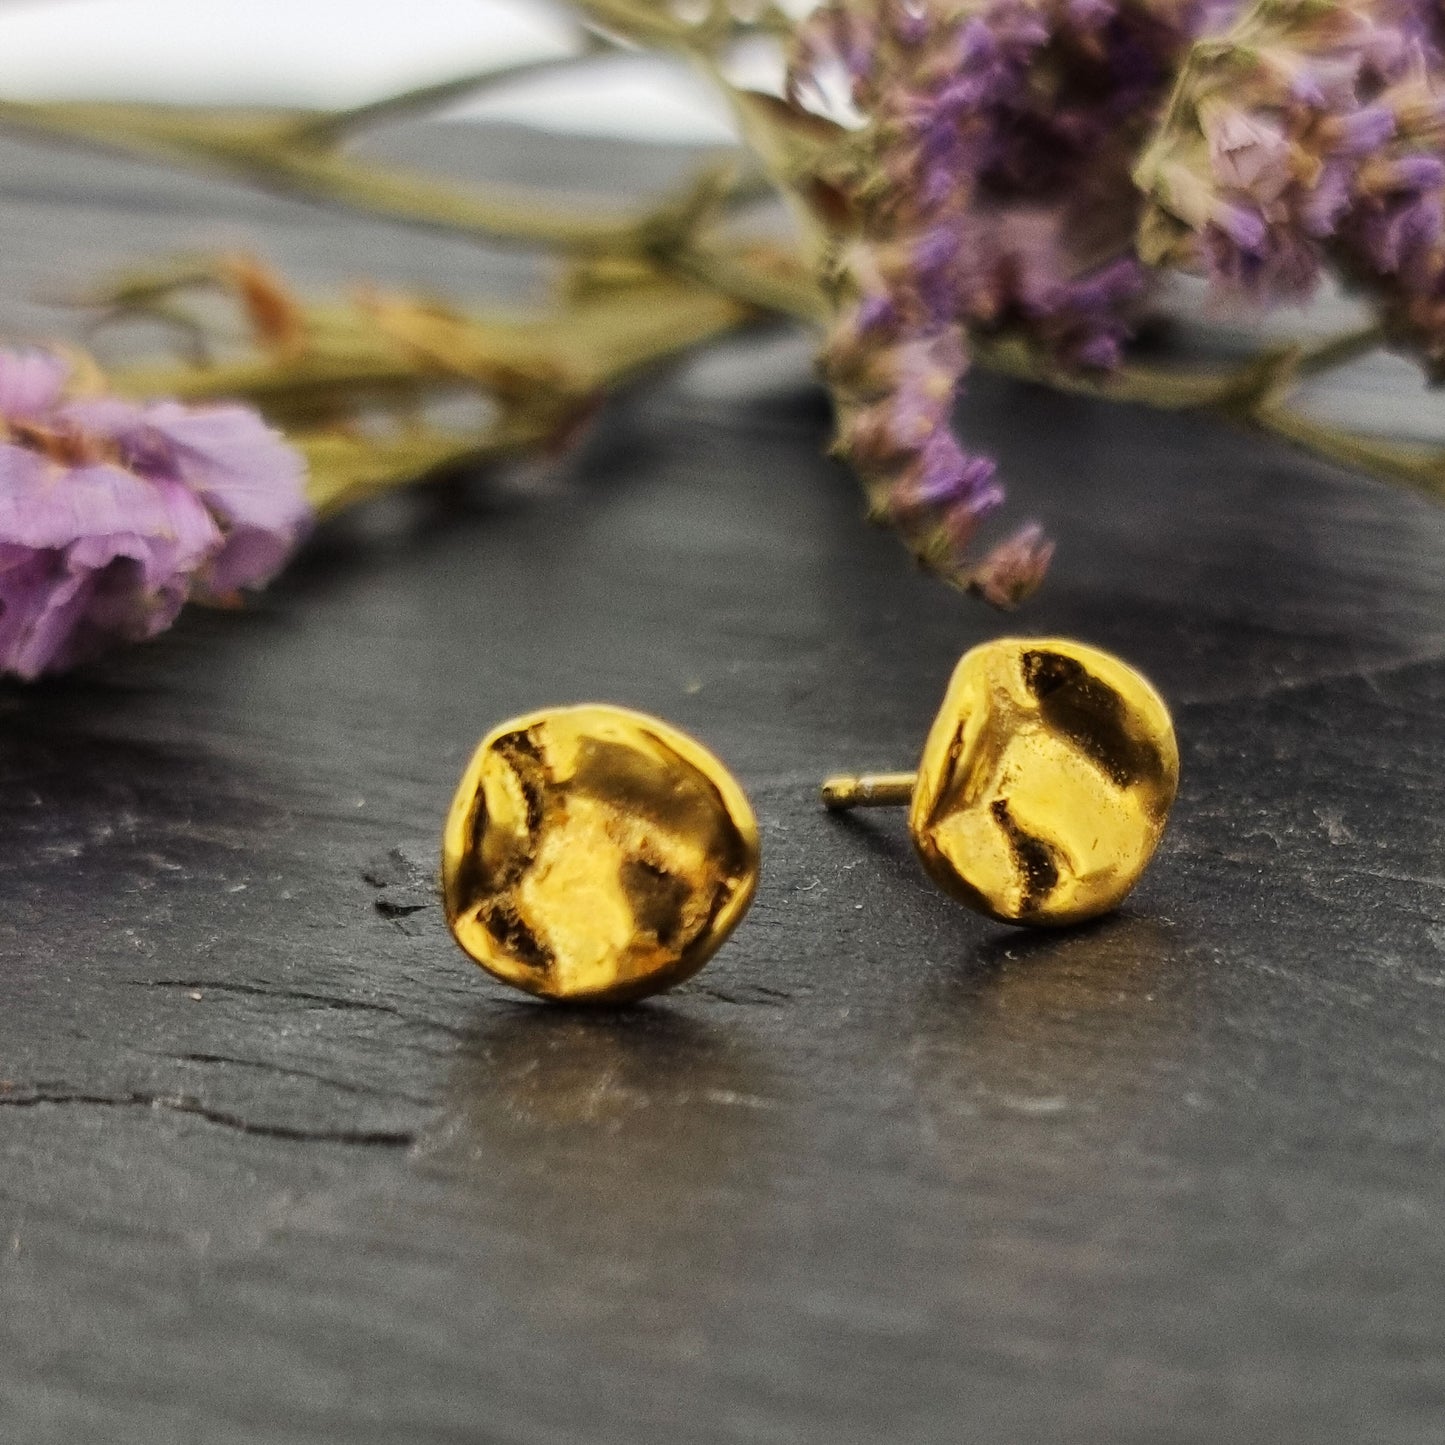 Yellow gold vermeil round stud earrings with a crumpled textured surface. Pictured with purple flowers.